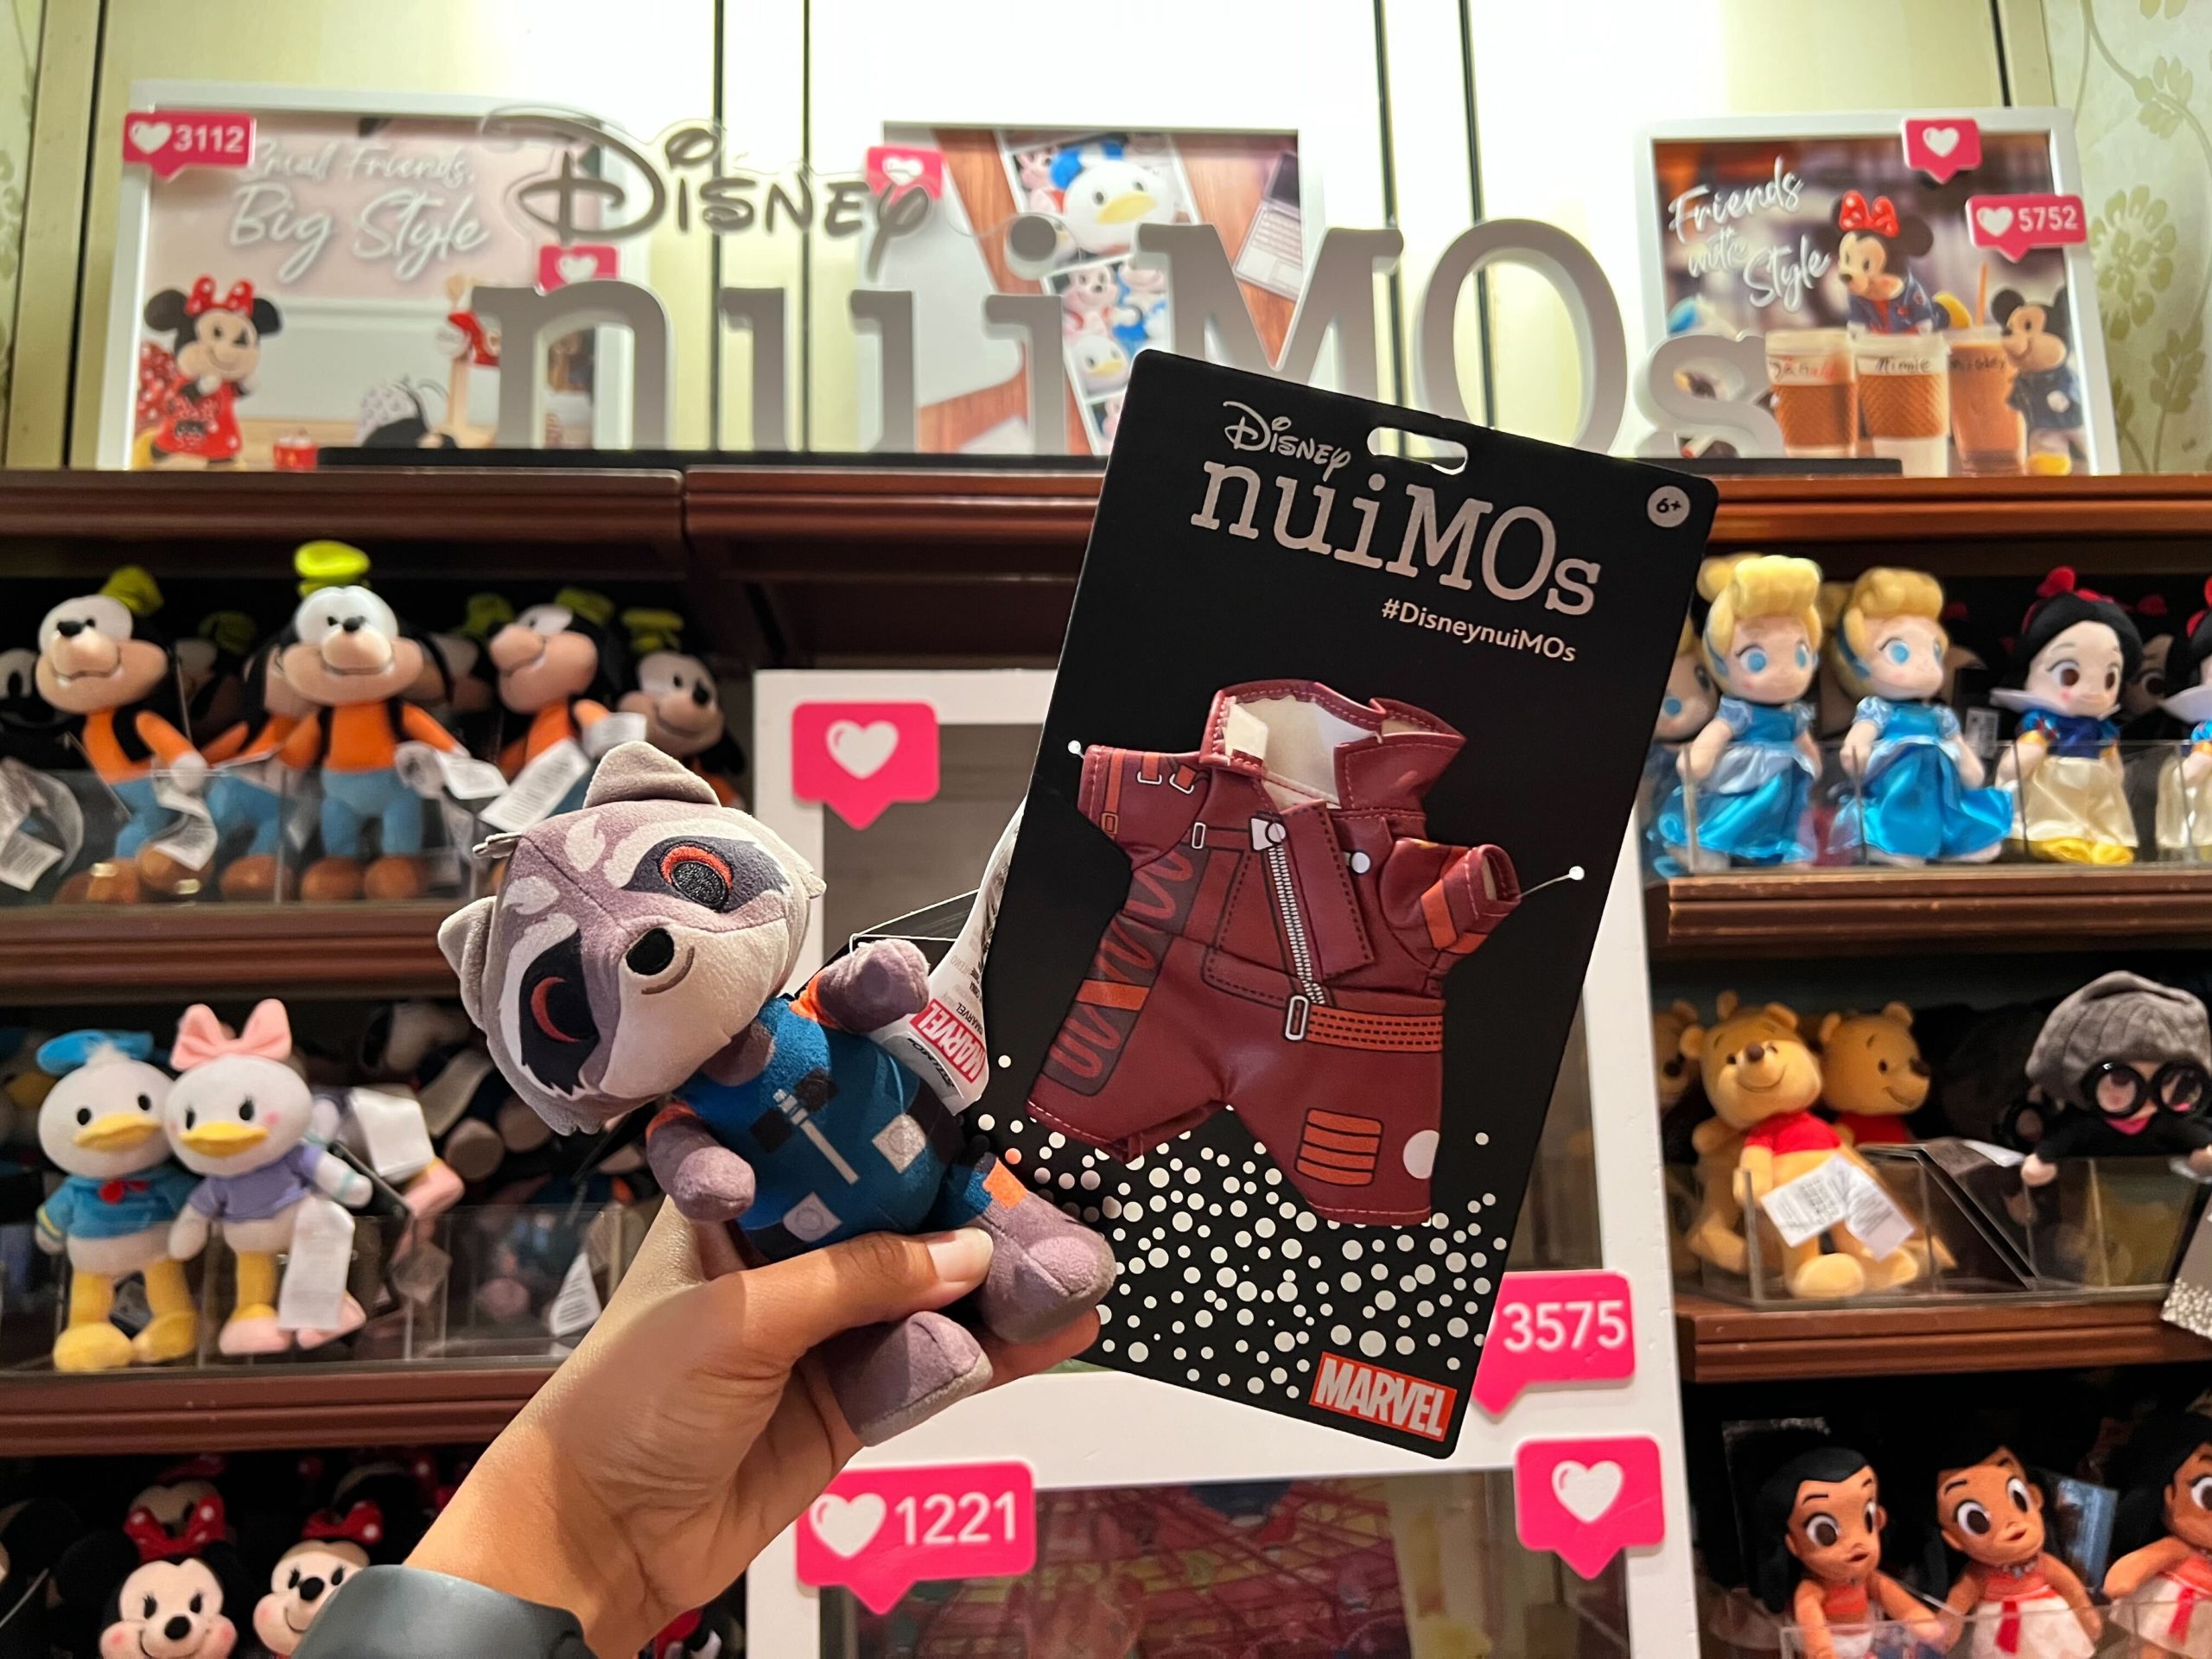 New Designer Swag for Disney nuiMOs Appears at Magic Kingdom